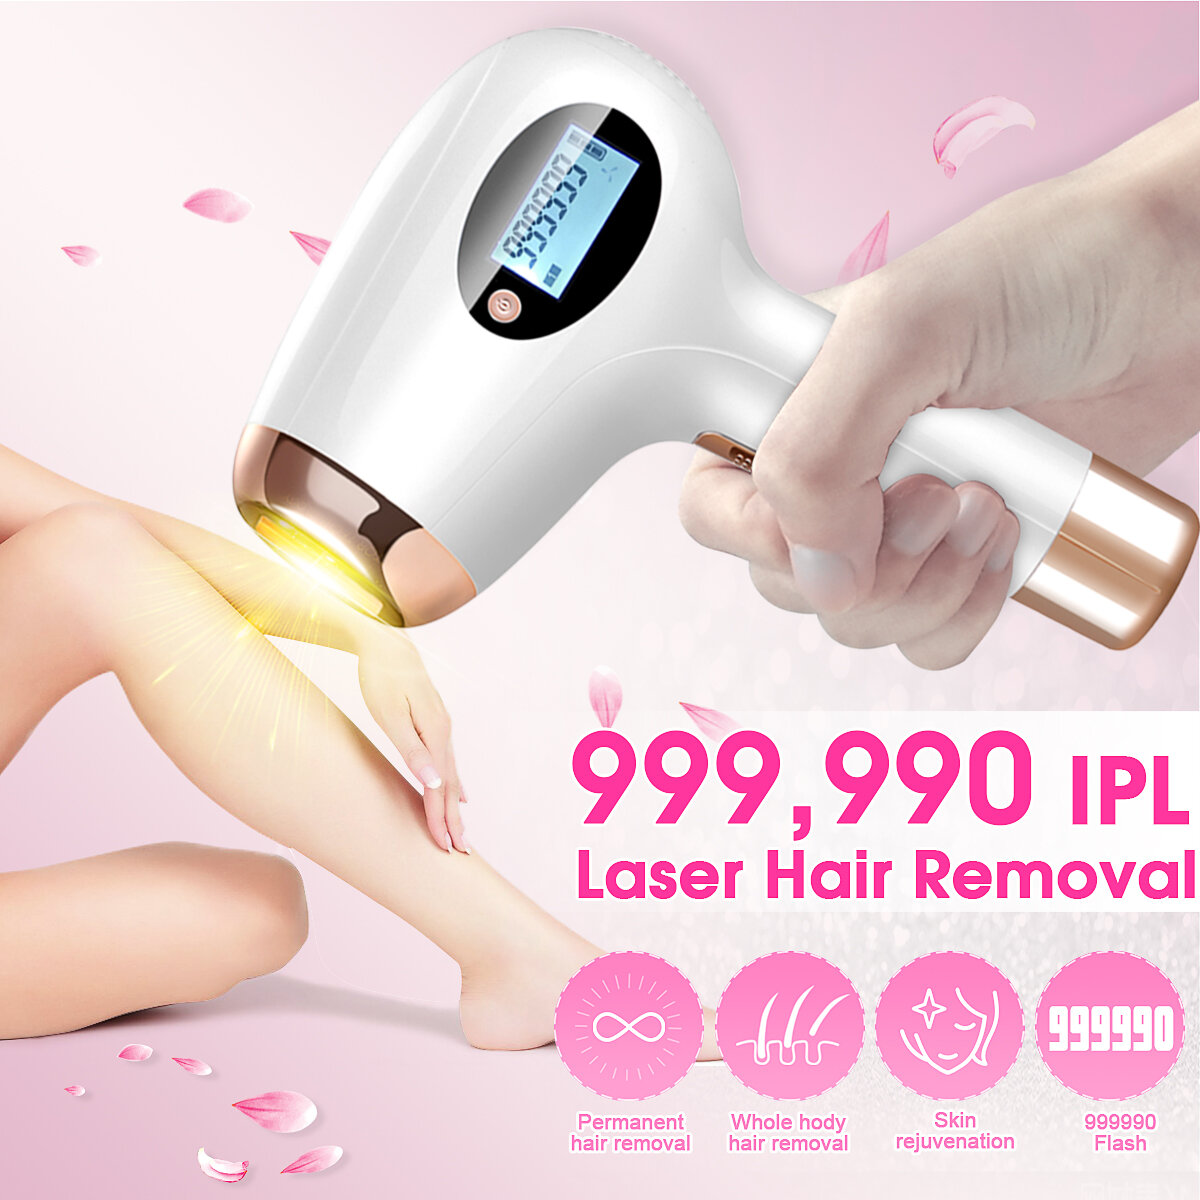 

999999 Flashes 5 Gear LCD Professional Permanent IPL Epilator Unisex Laser Painless Hair Removal Device